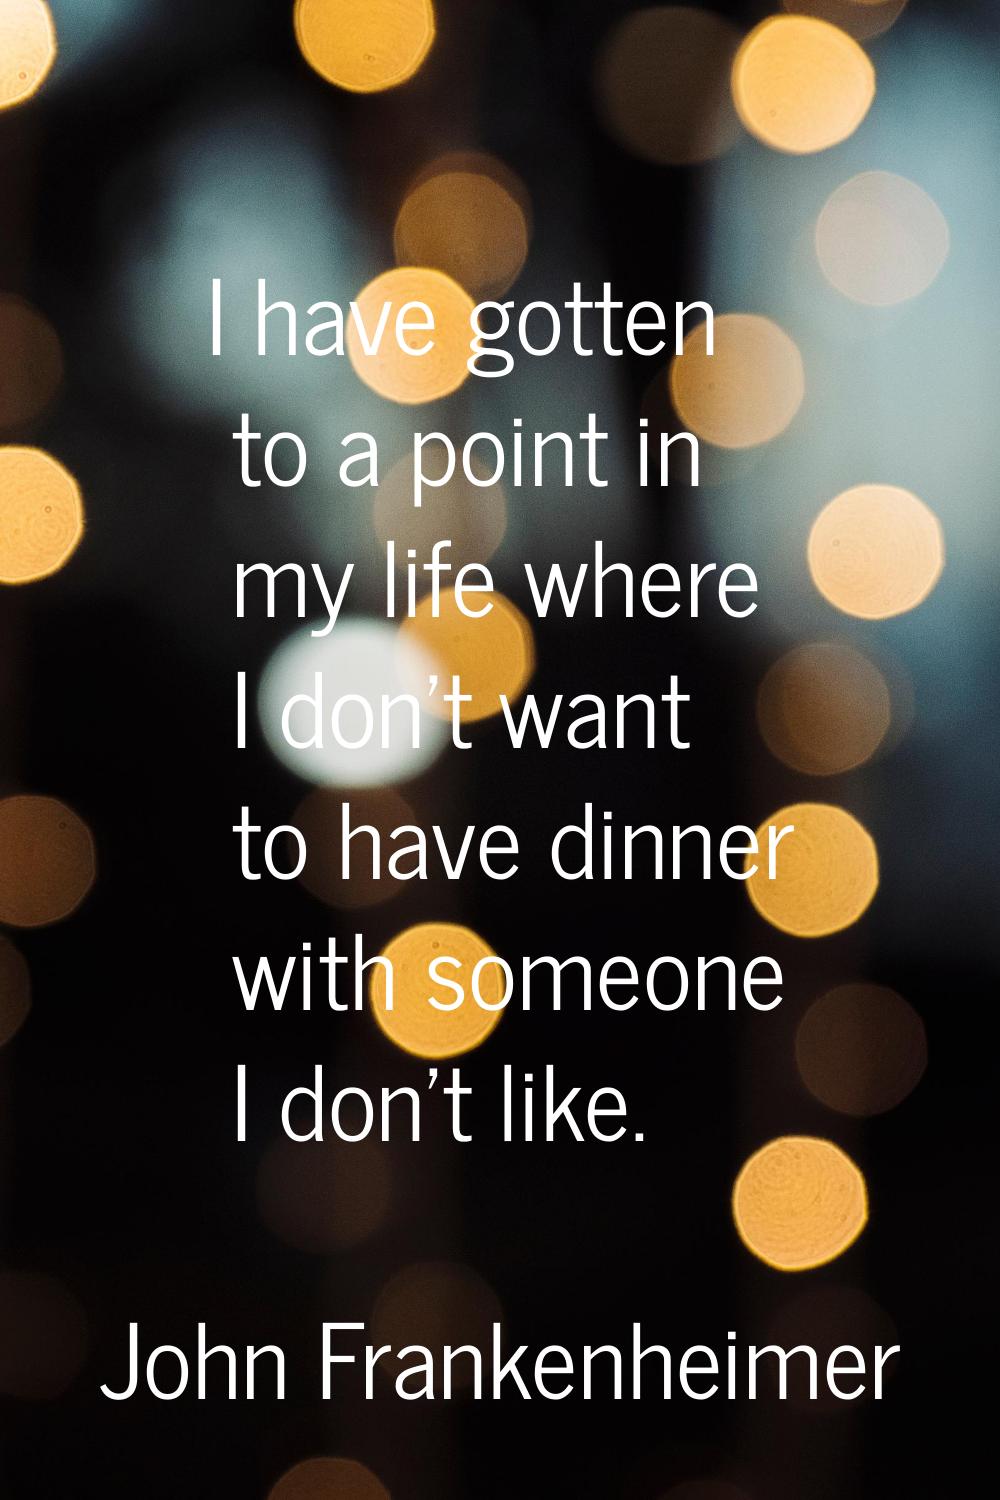 I have gotten to a point in my life where I don't want to have dinner with someone I don't like.